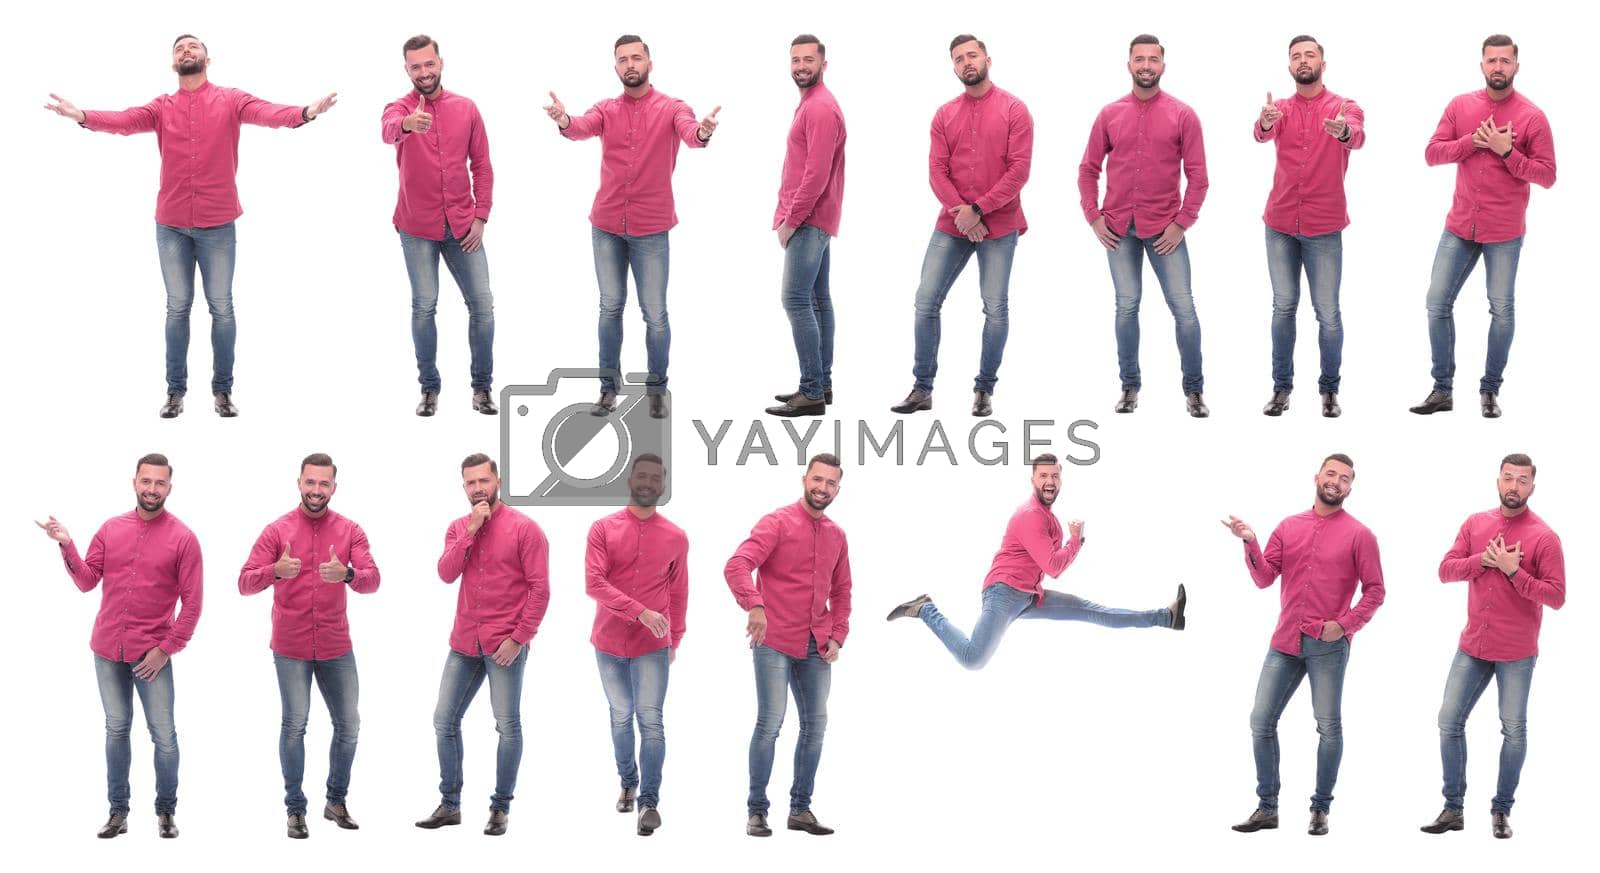 Royalty free image of collage of photos of an emotional man in a red shirt by asdf